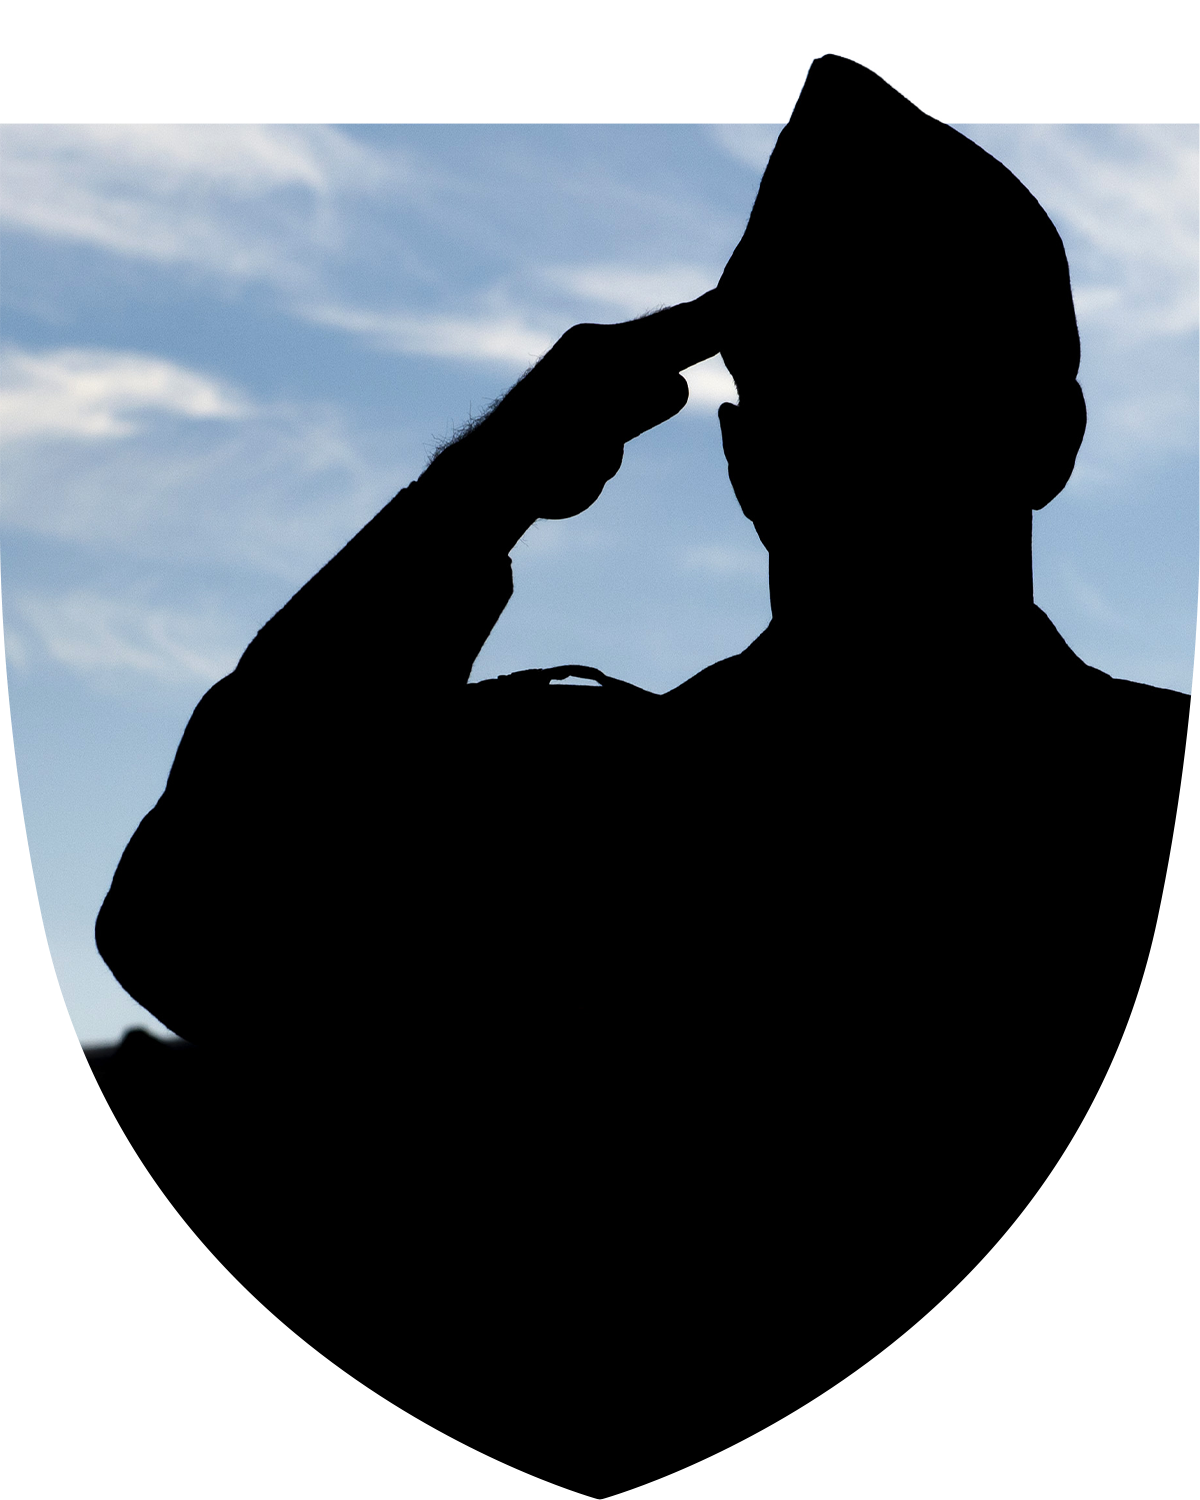 Military officer in uniform saluting